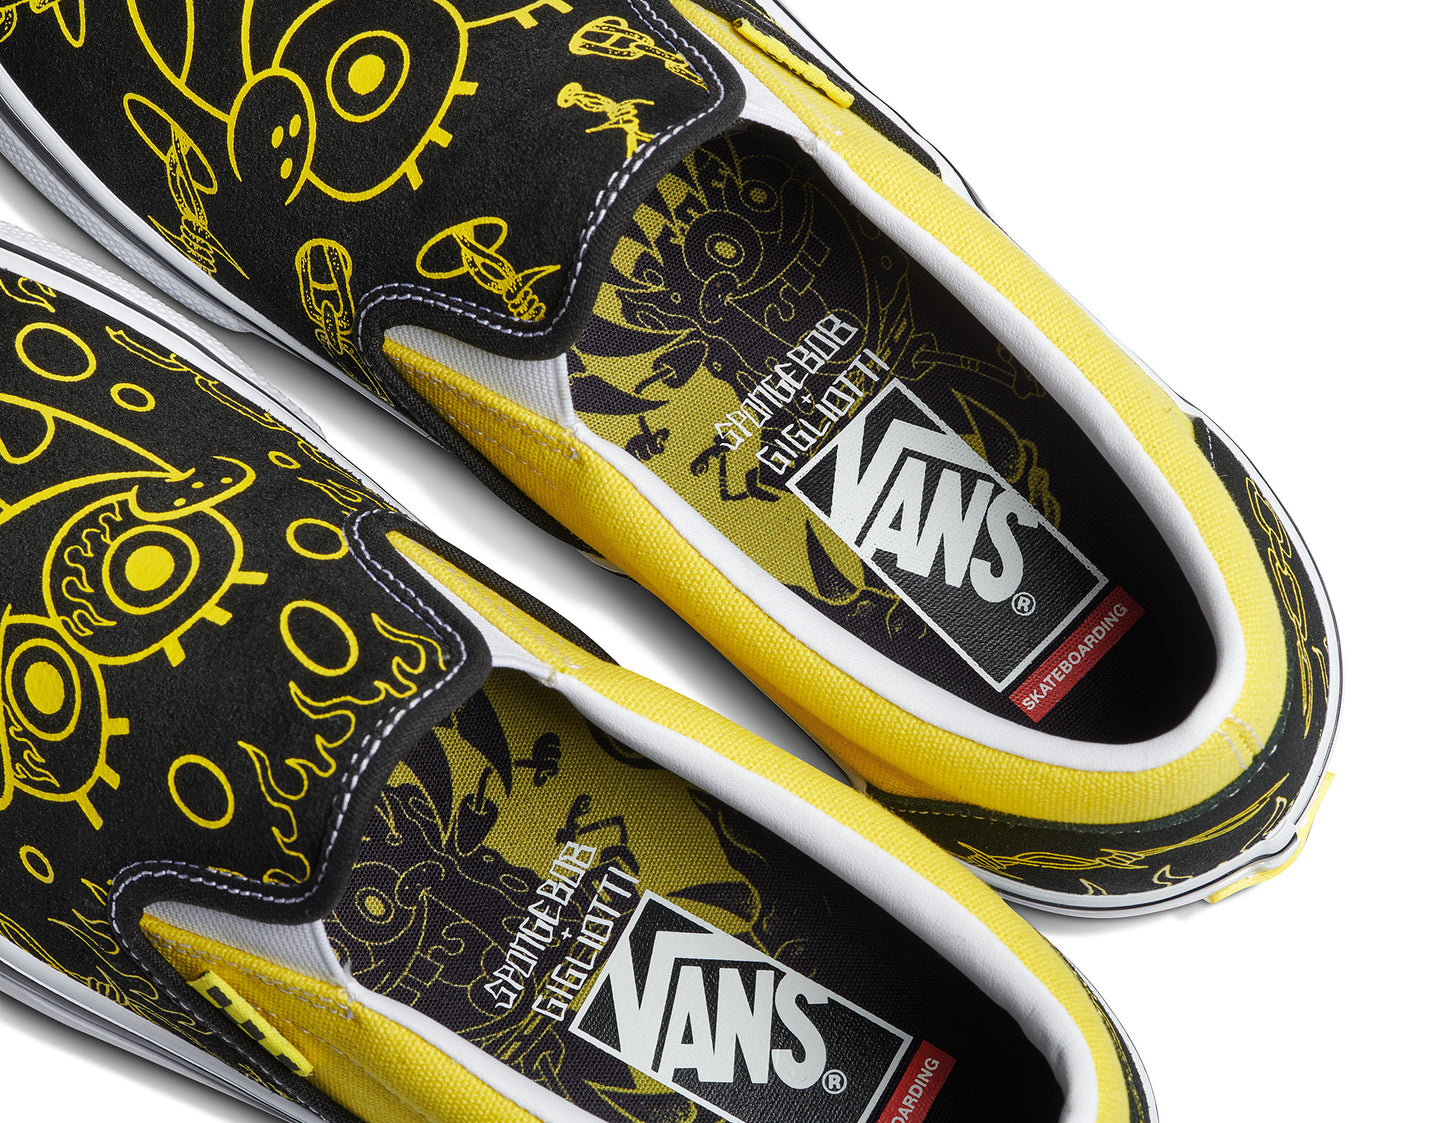 Skate Slip On Spongebob X Mike Gigliotti Shoe Blk/Ylw/Wht (size options listed)